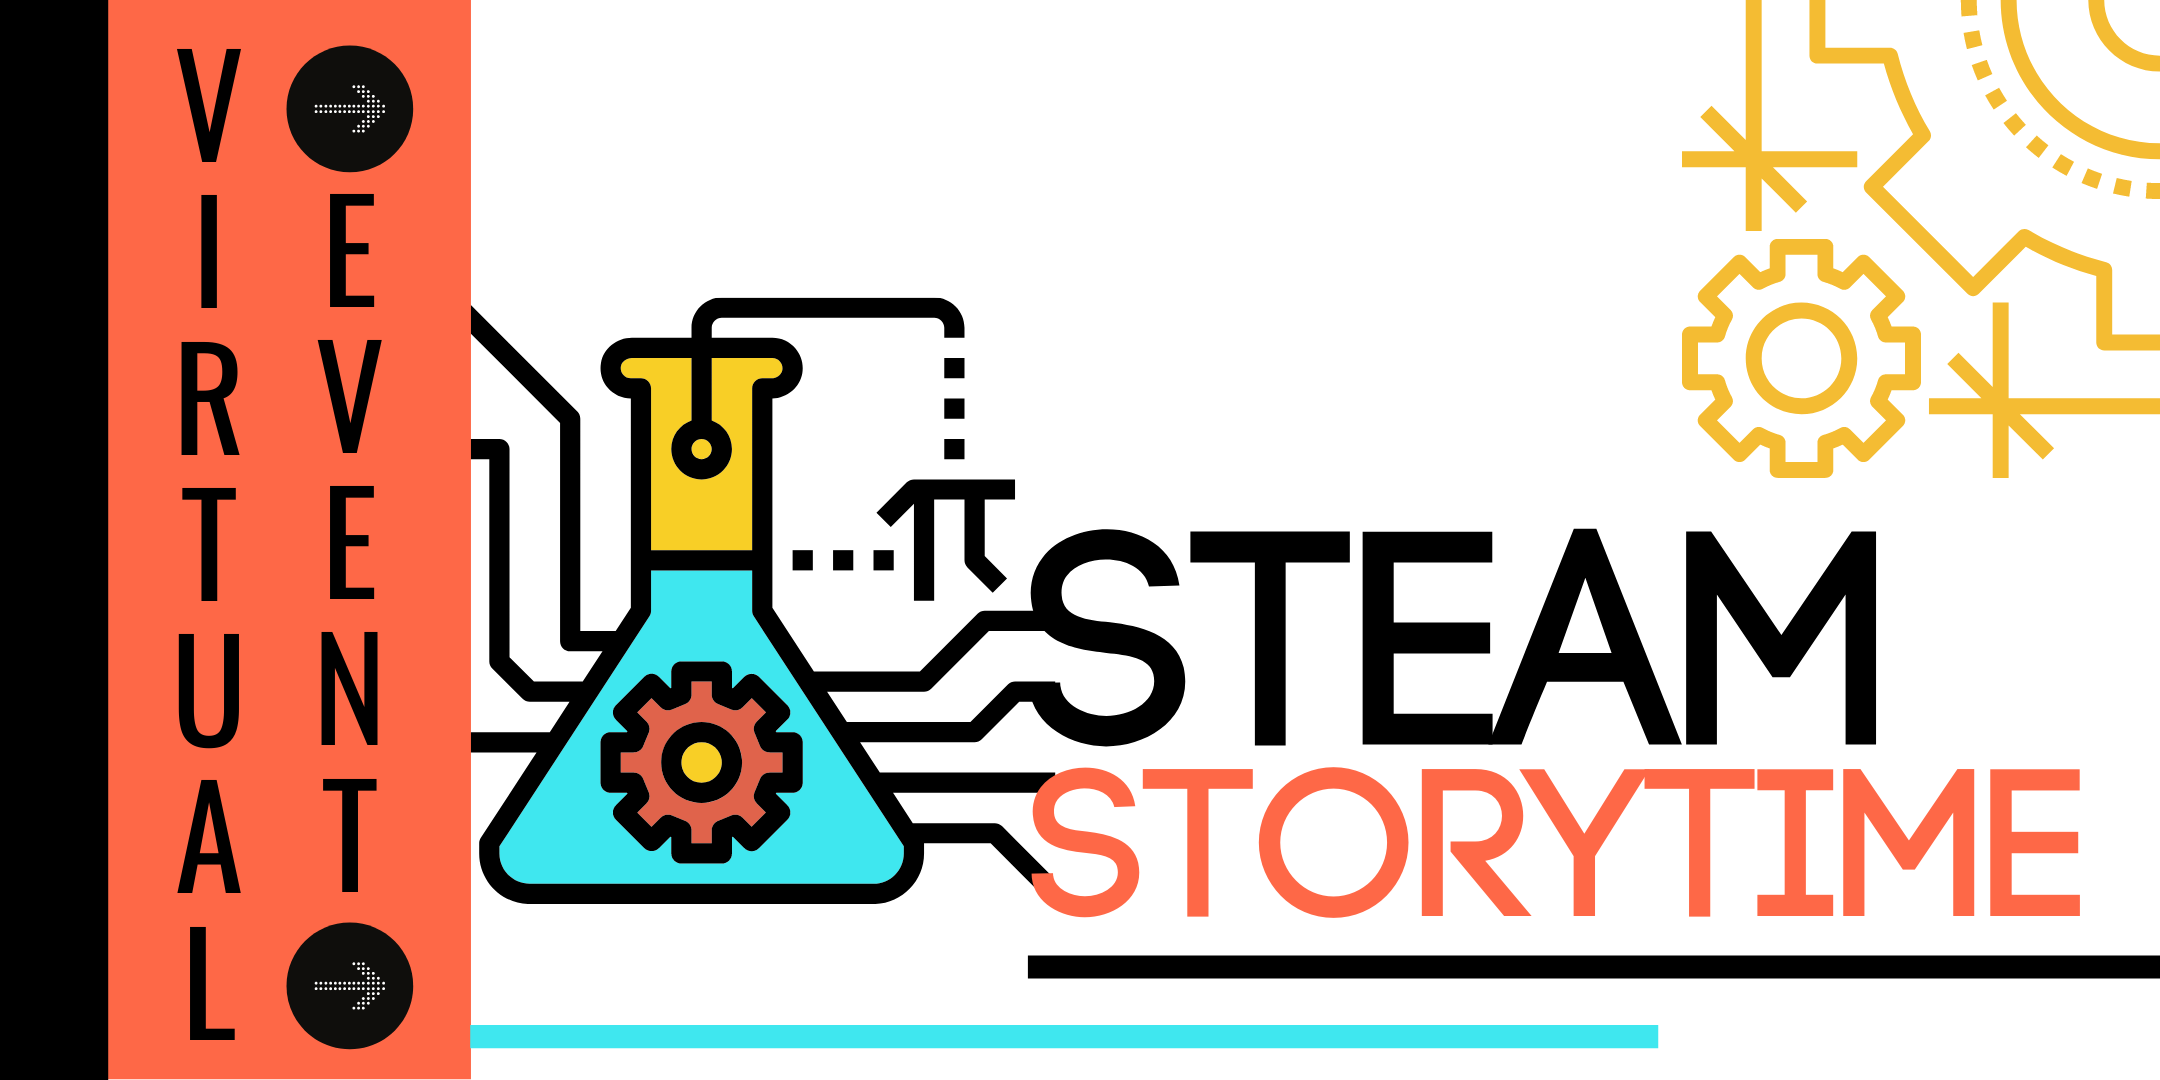 download her story steam for free